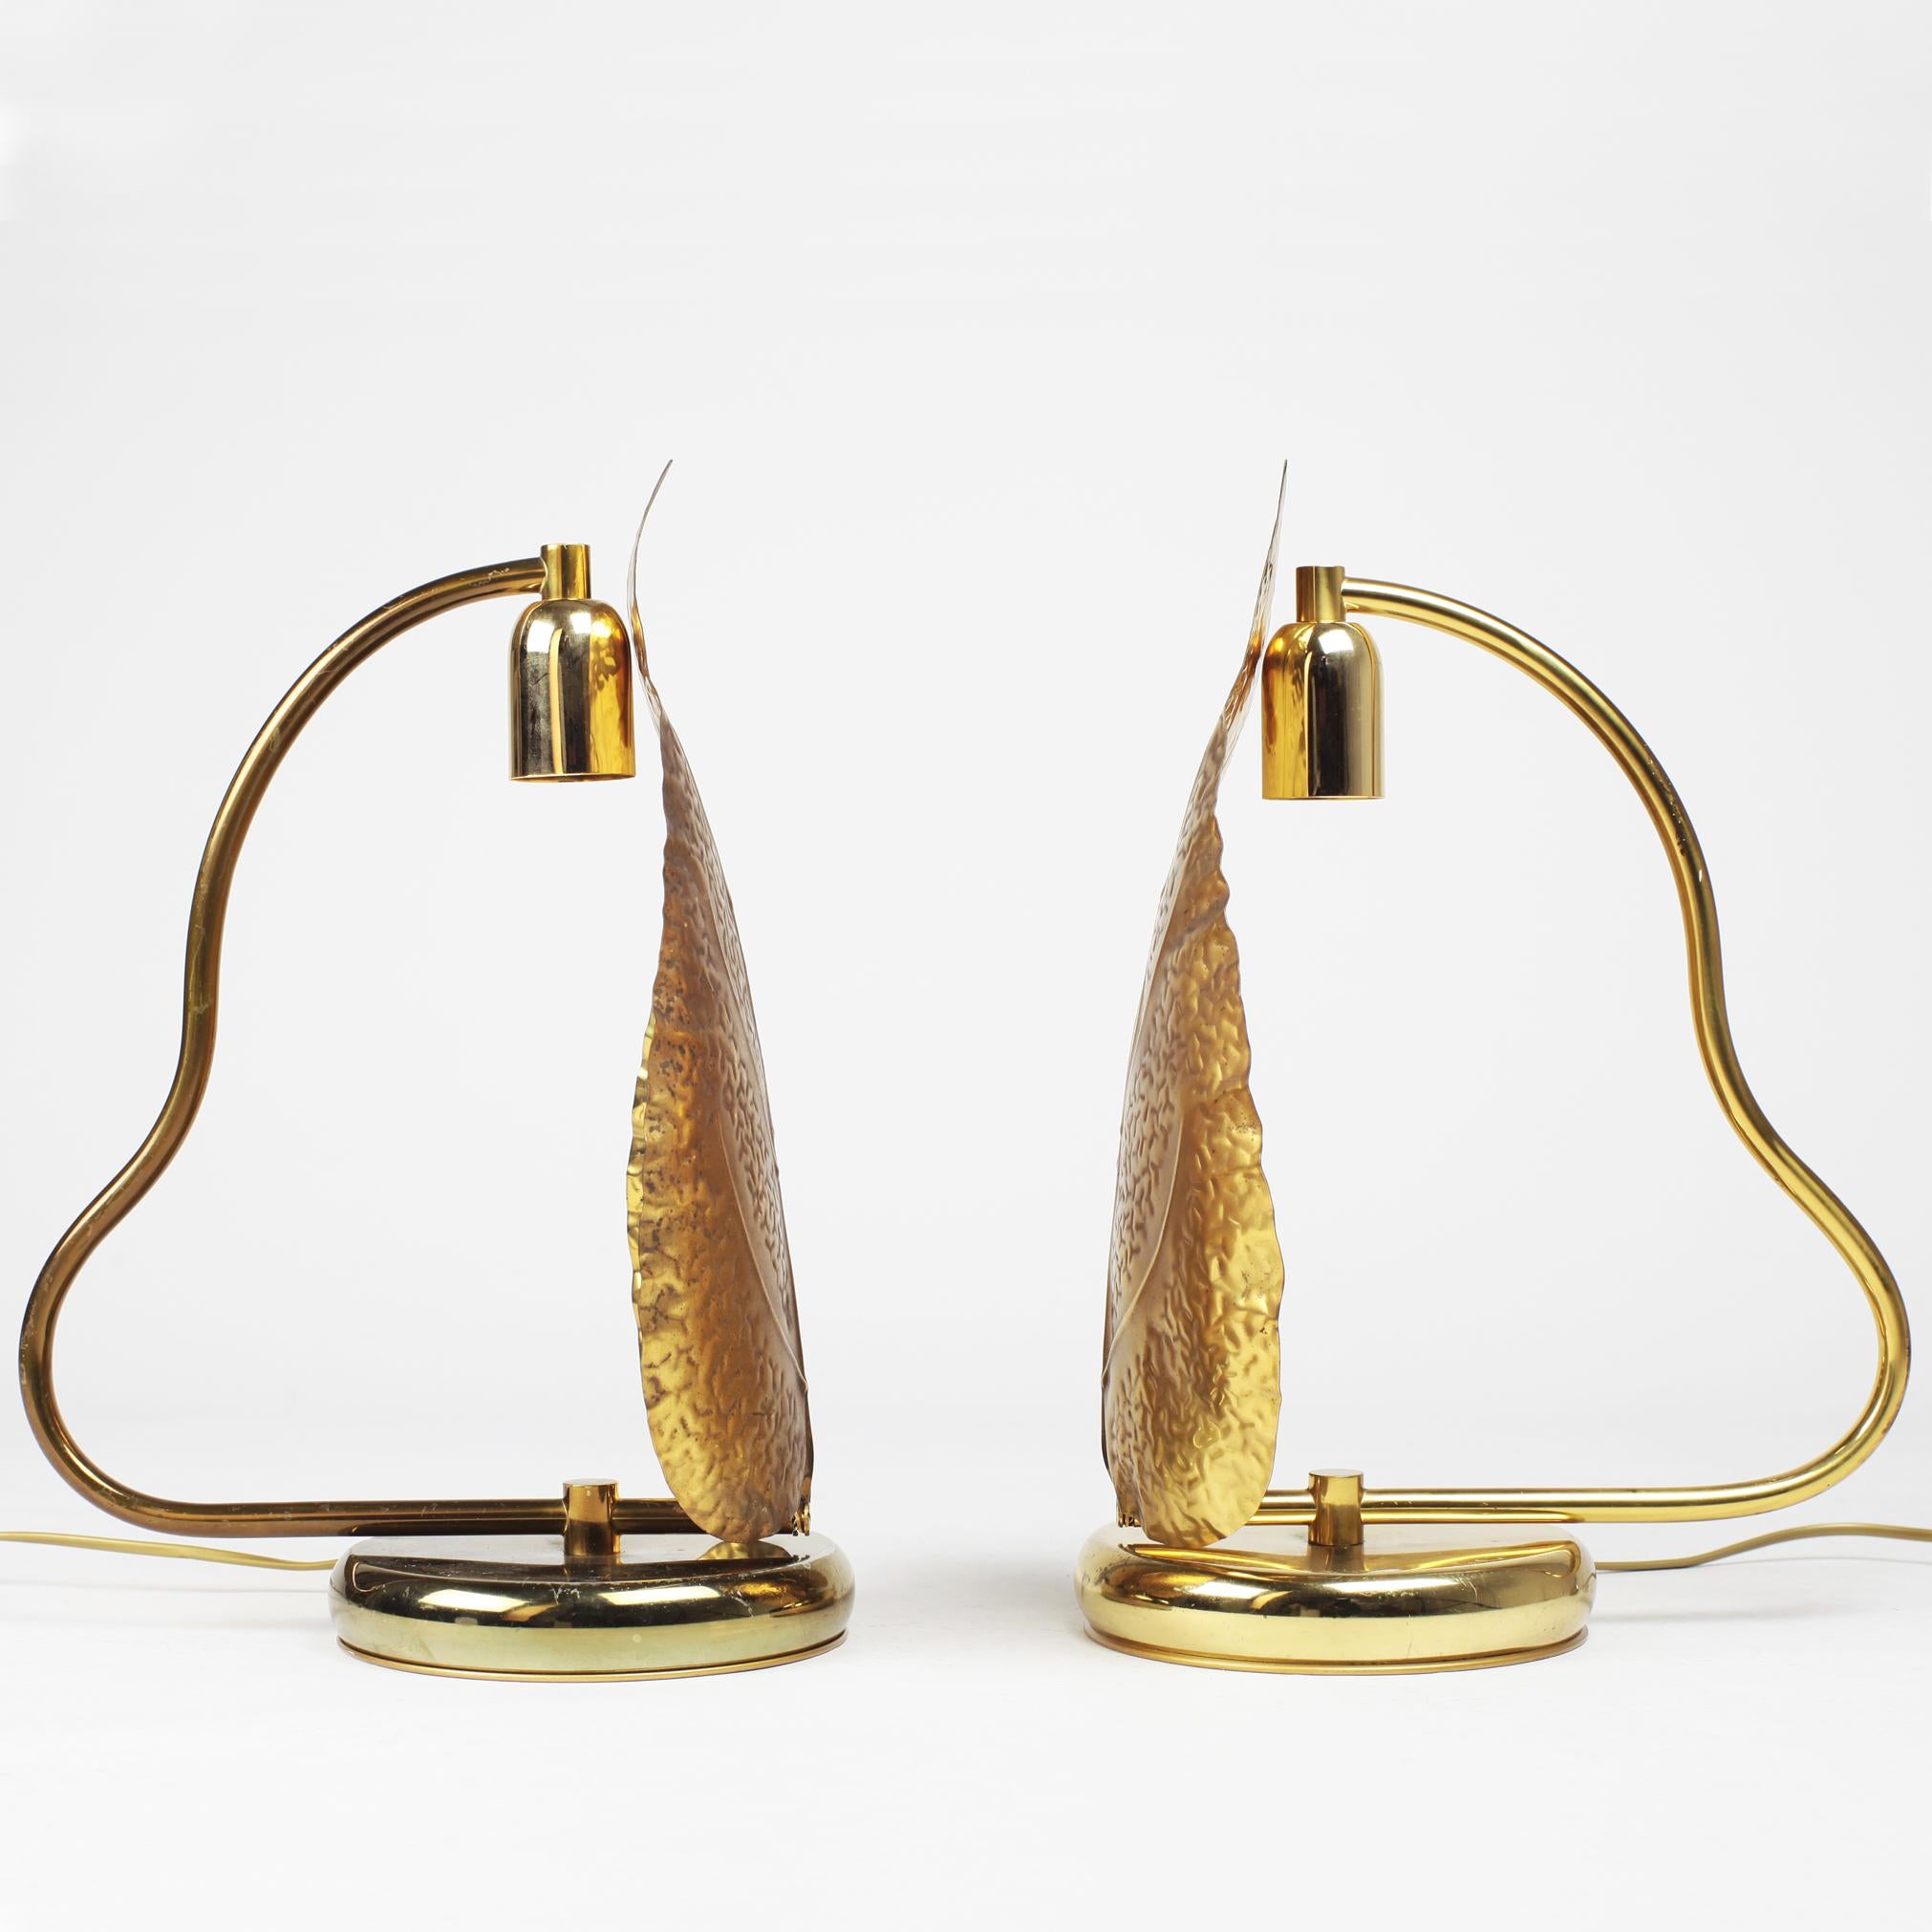 Pair of gilded Italian table lamps from the 1970s
Leaf shaped brass shade and gilded metal stand
Nice patina.